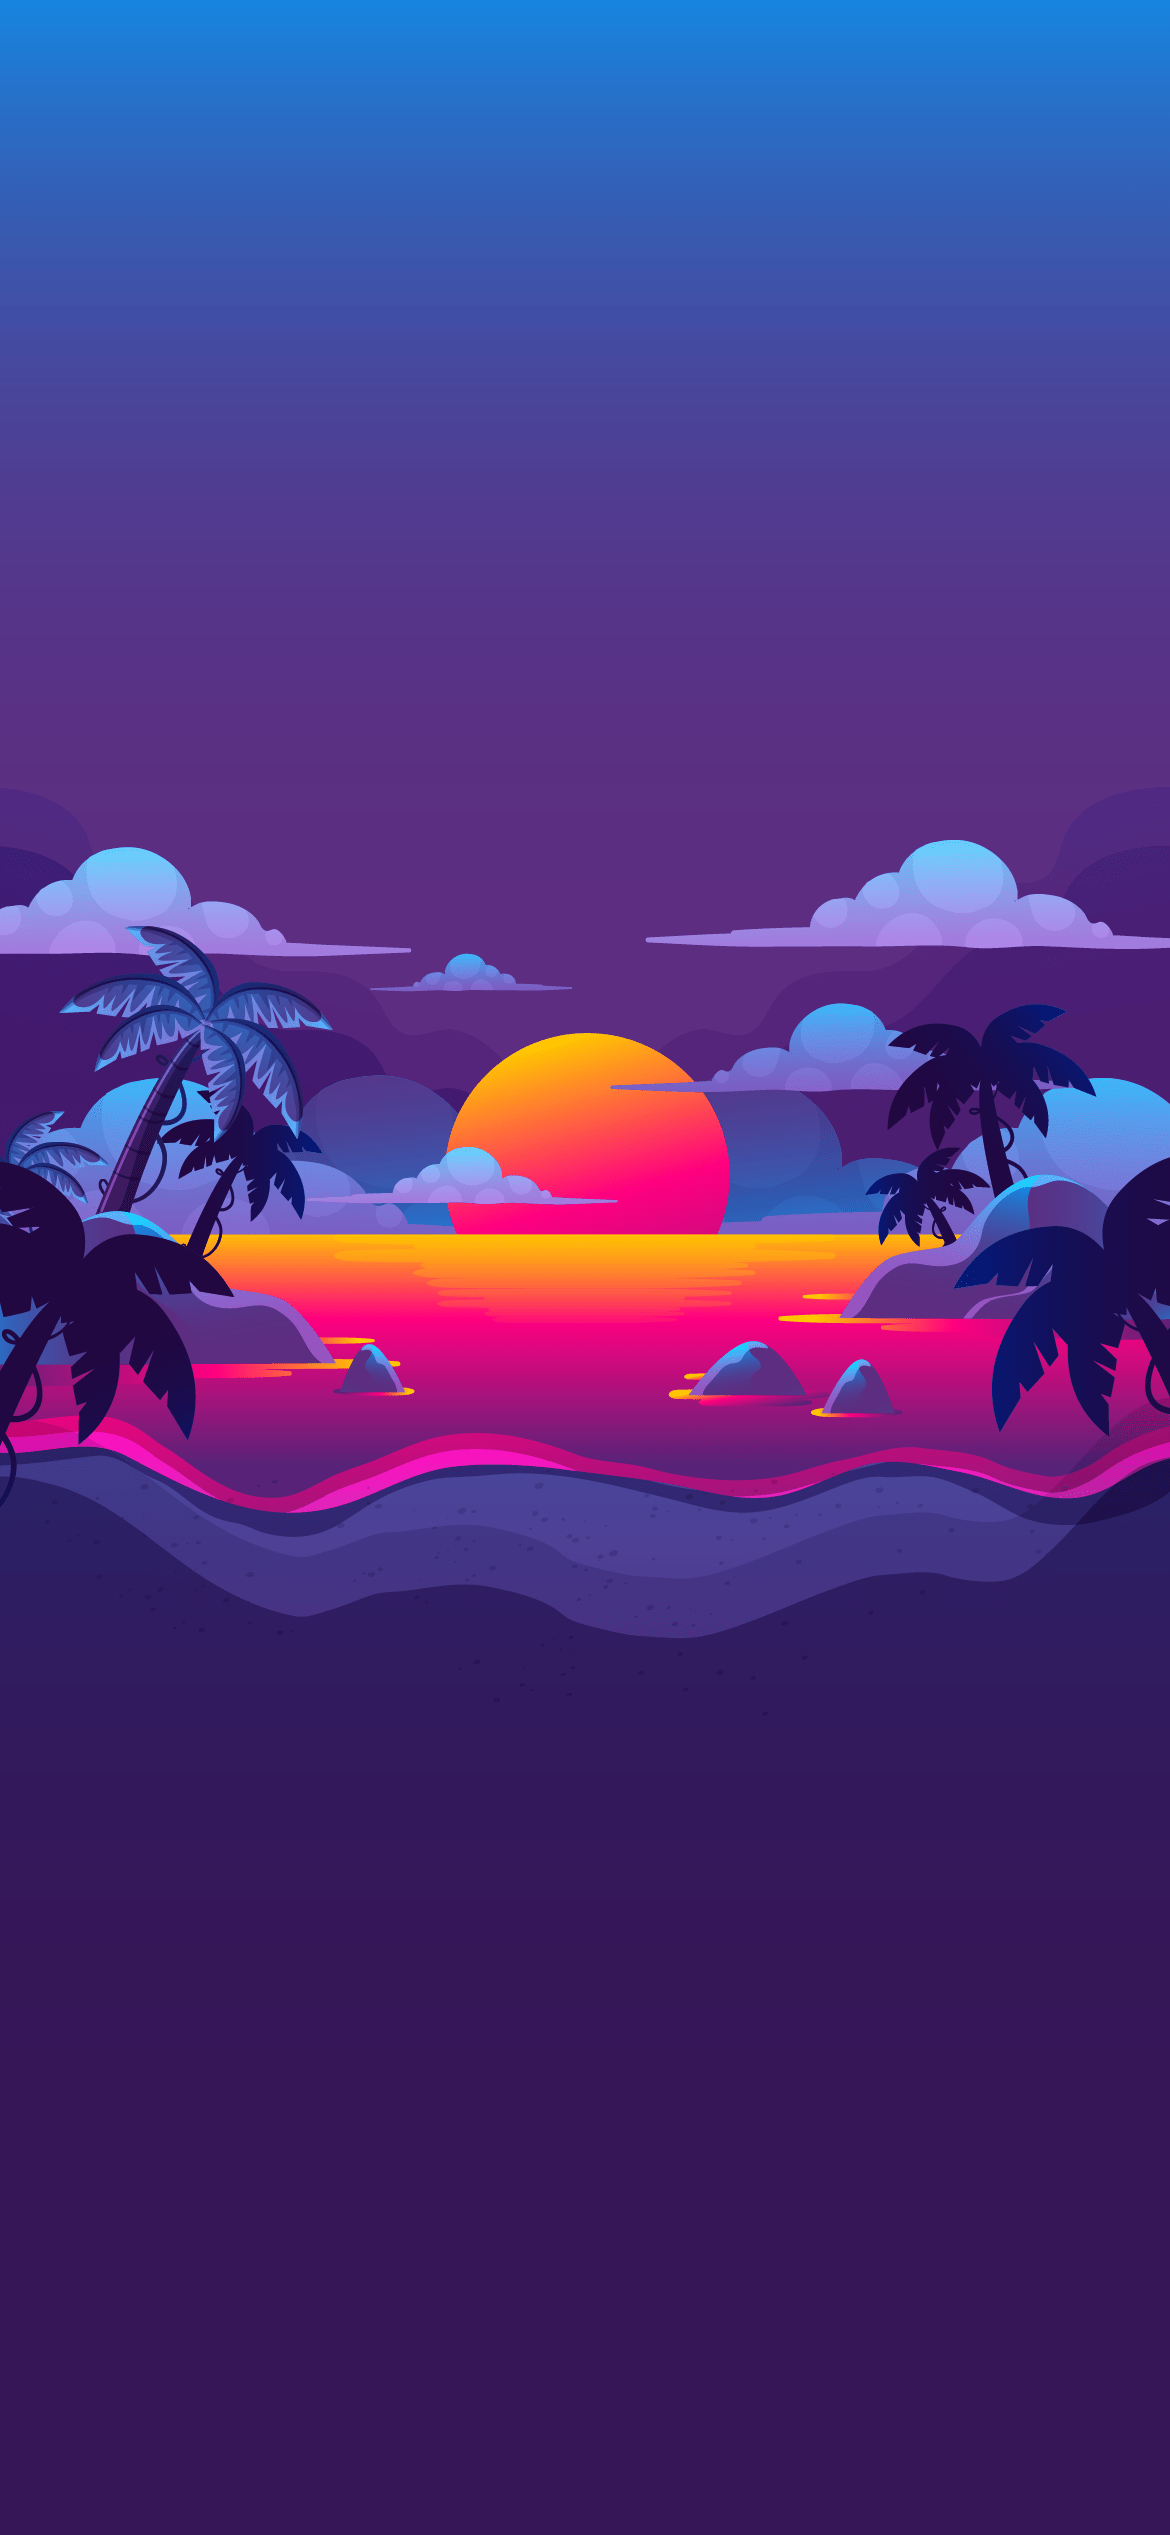 A sunset scene with palm trees and ocean - IPhone